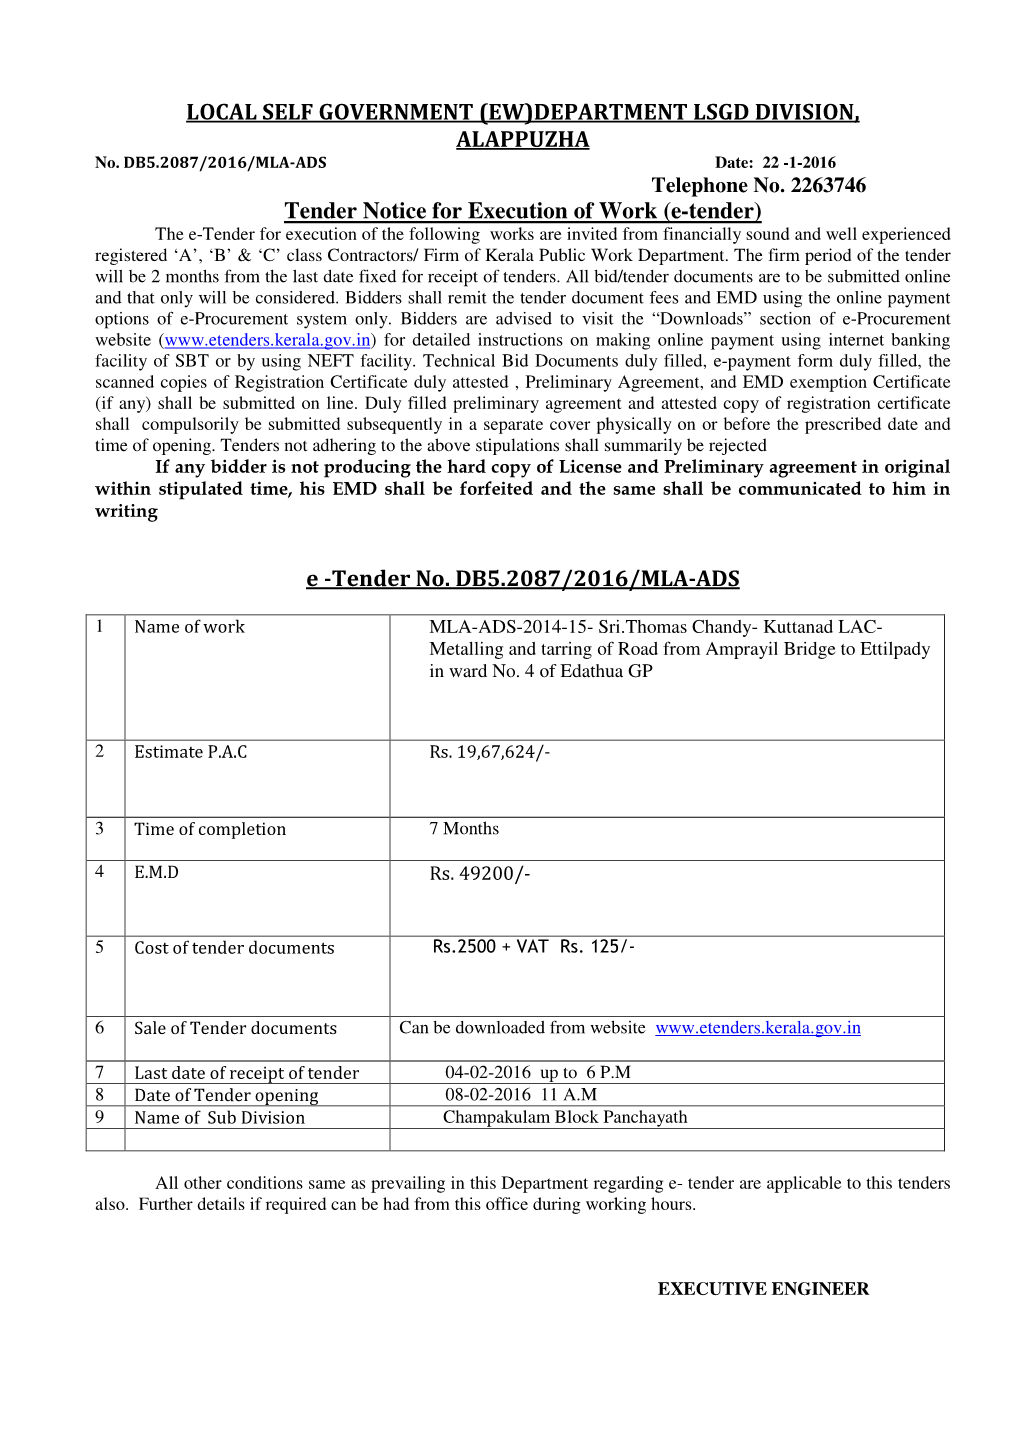 LOCAL SELF GOVERNMENT (EW)DEPARTMENT LSGD DIVISION, ALAPPUZHA Tender Notice for Execution of Work (E-Tender) E -Tender No. DB5.2